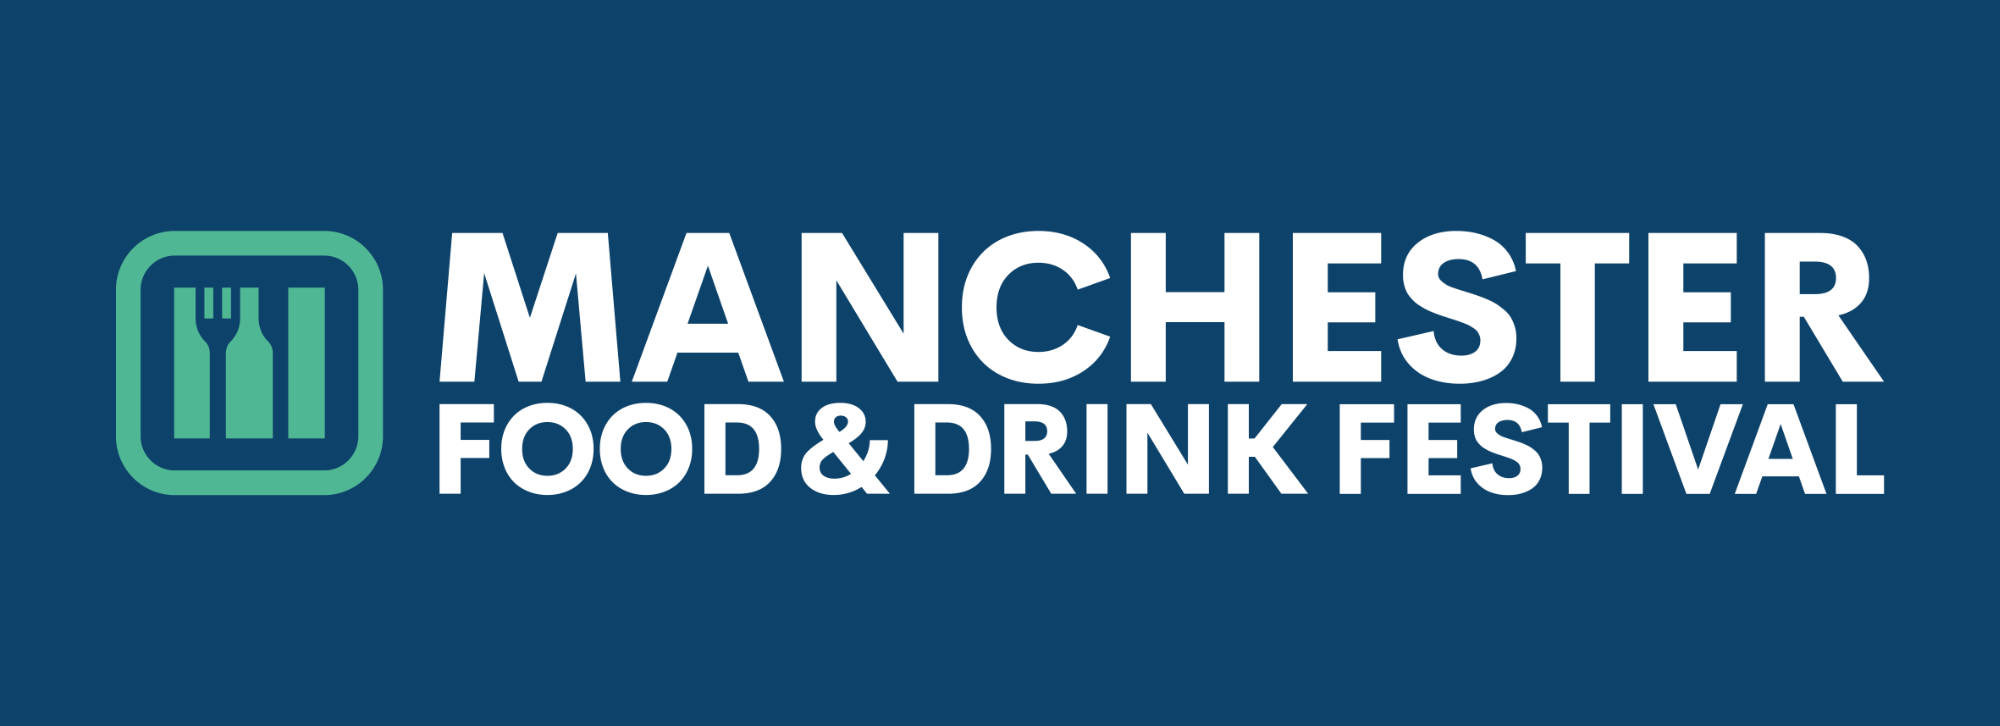 Manchester Food and Drink Festival Logo